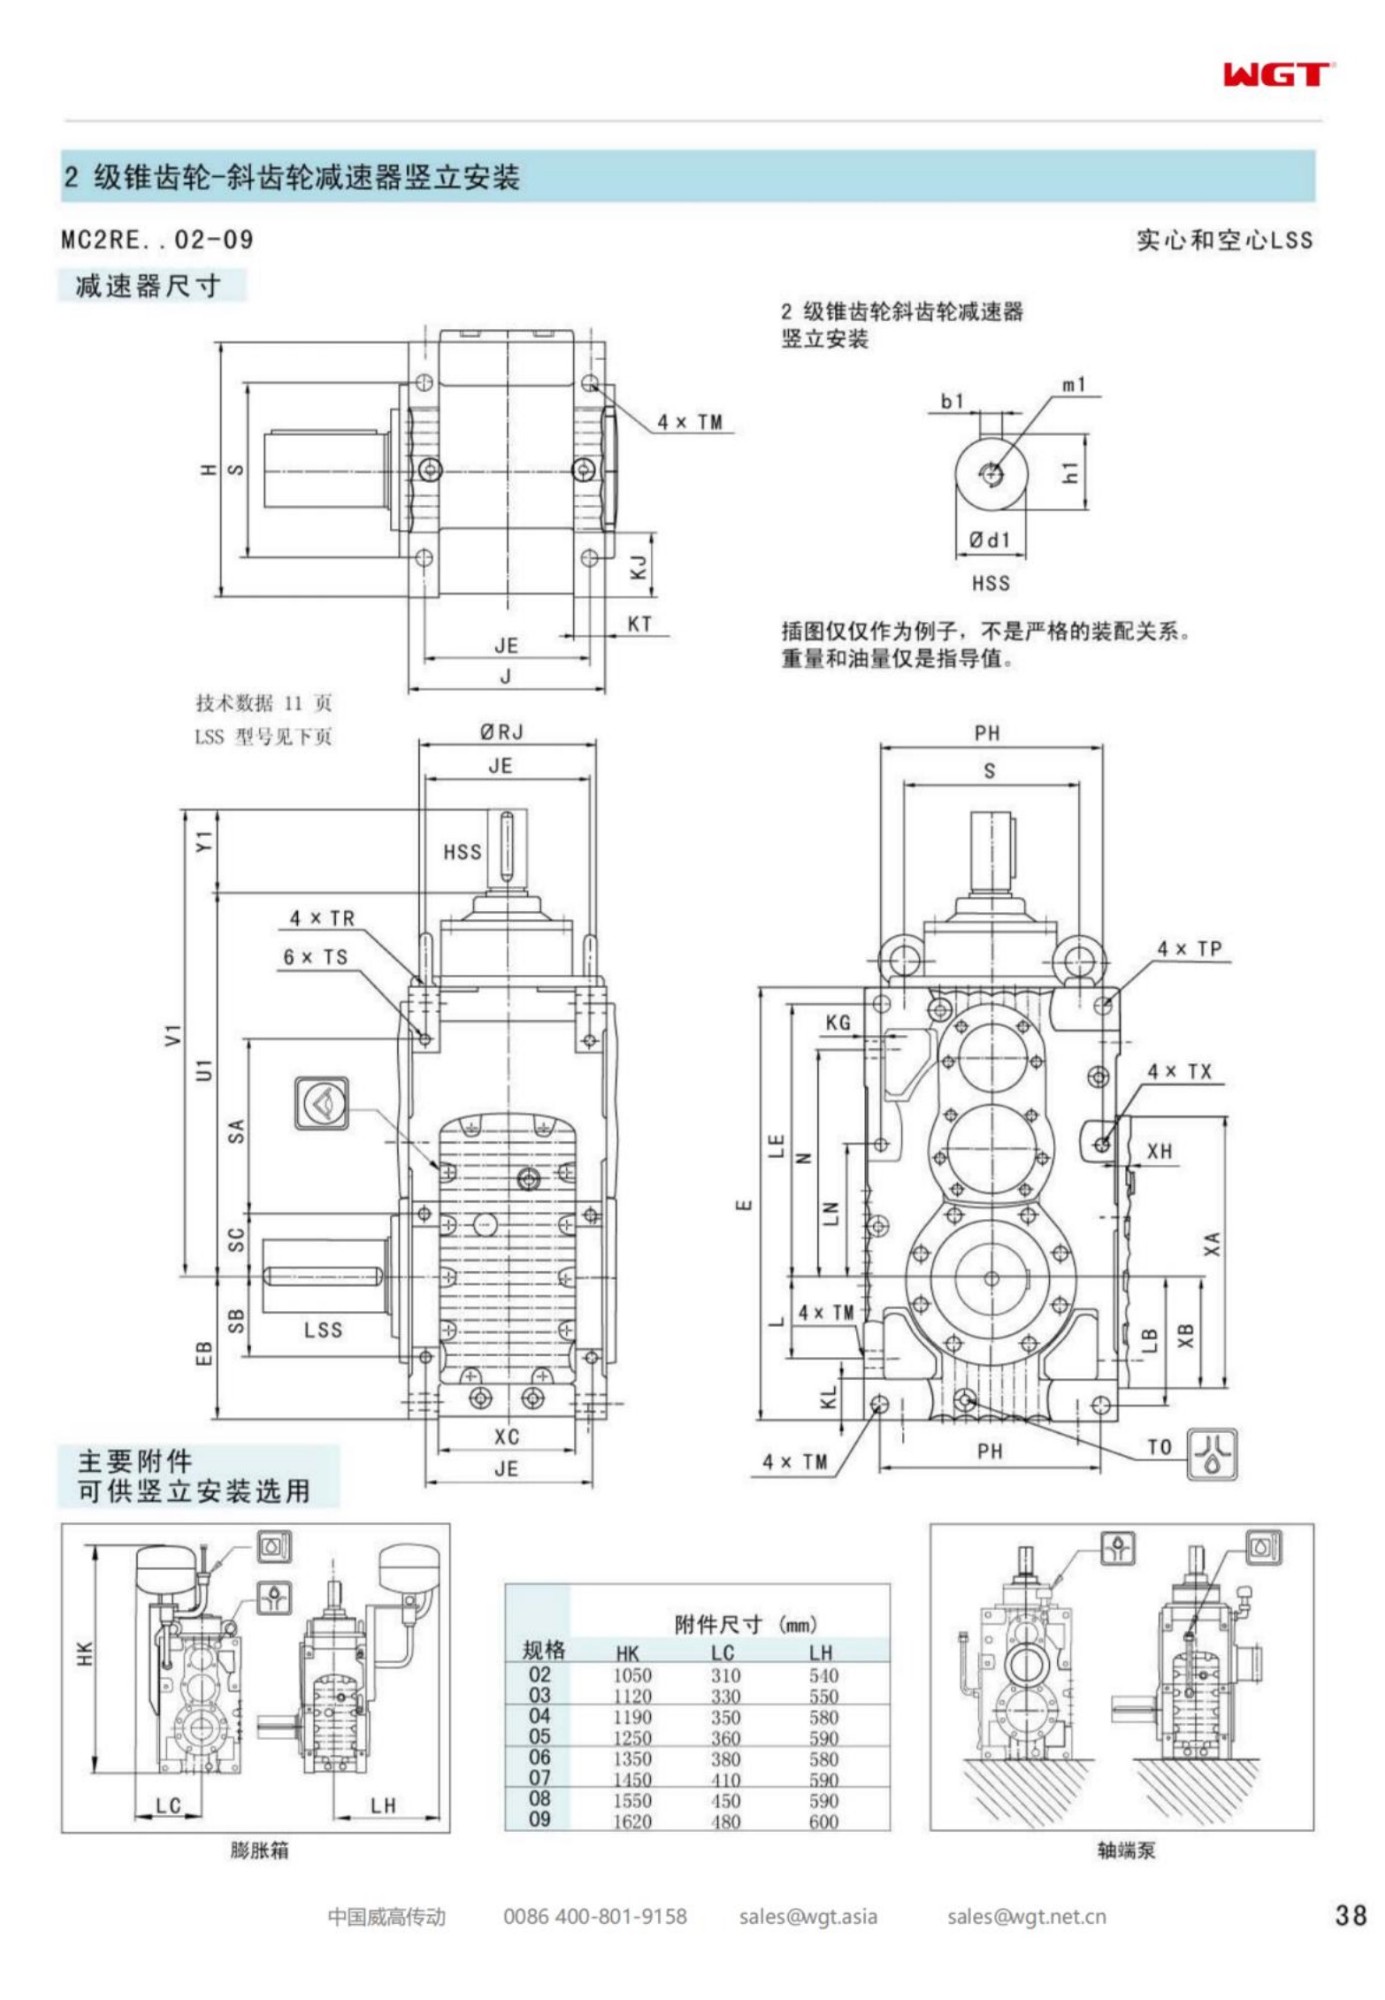 MC2RESF09 Replace_SEW_MC_Series Gearbox